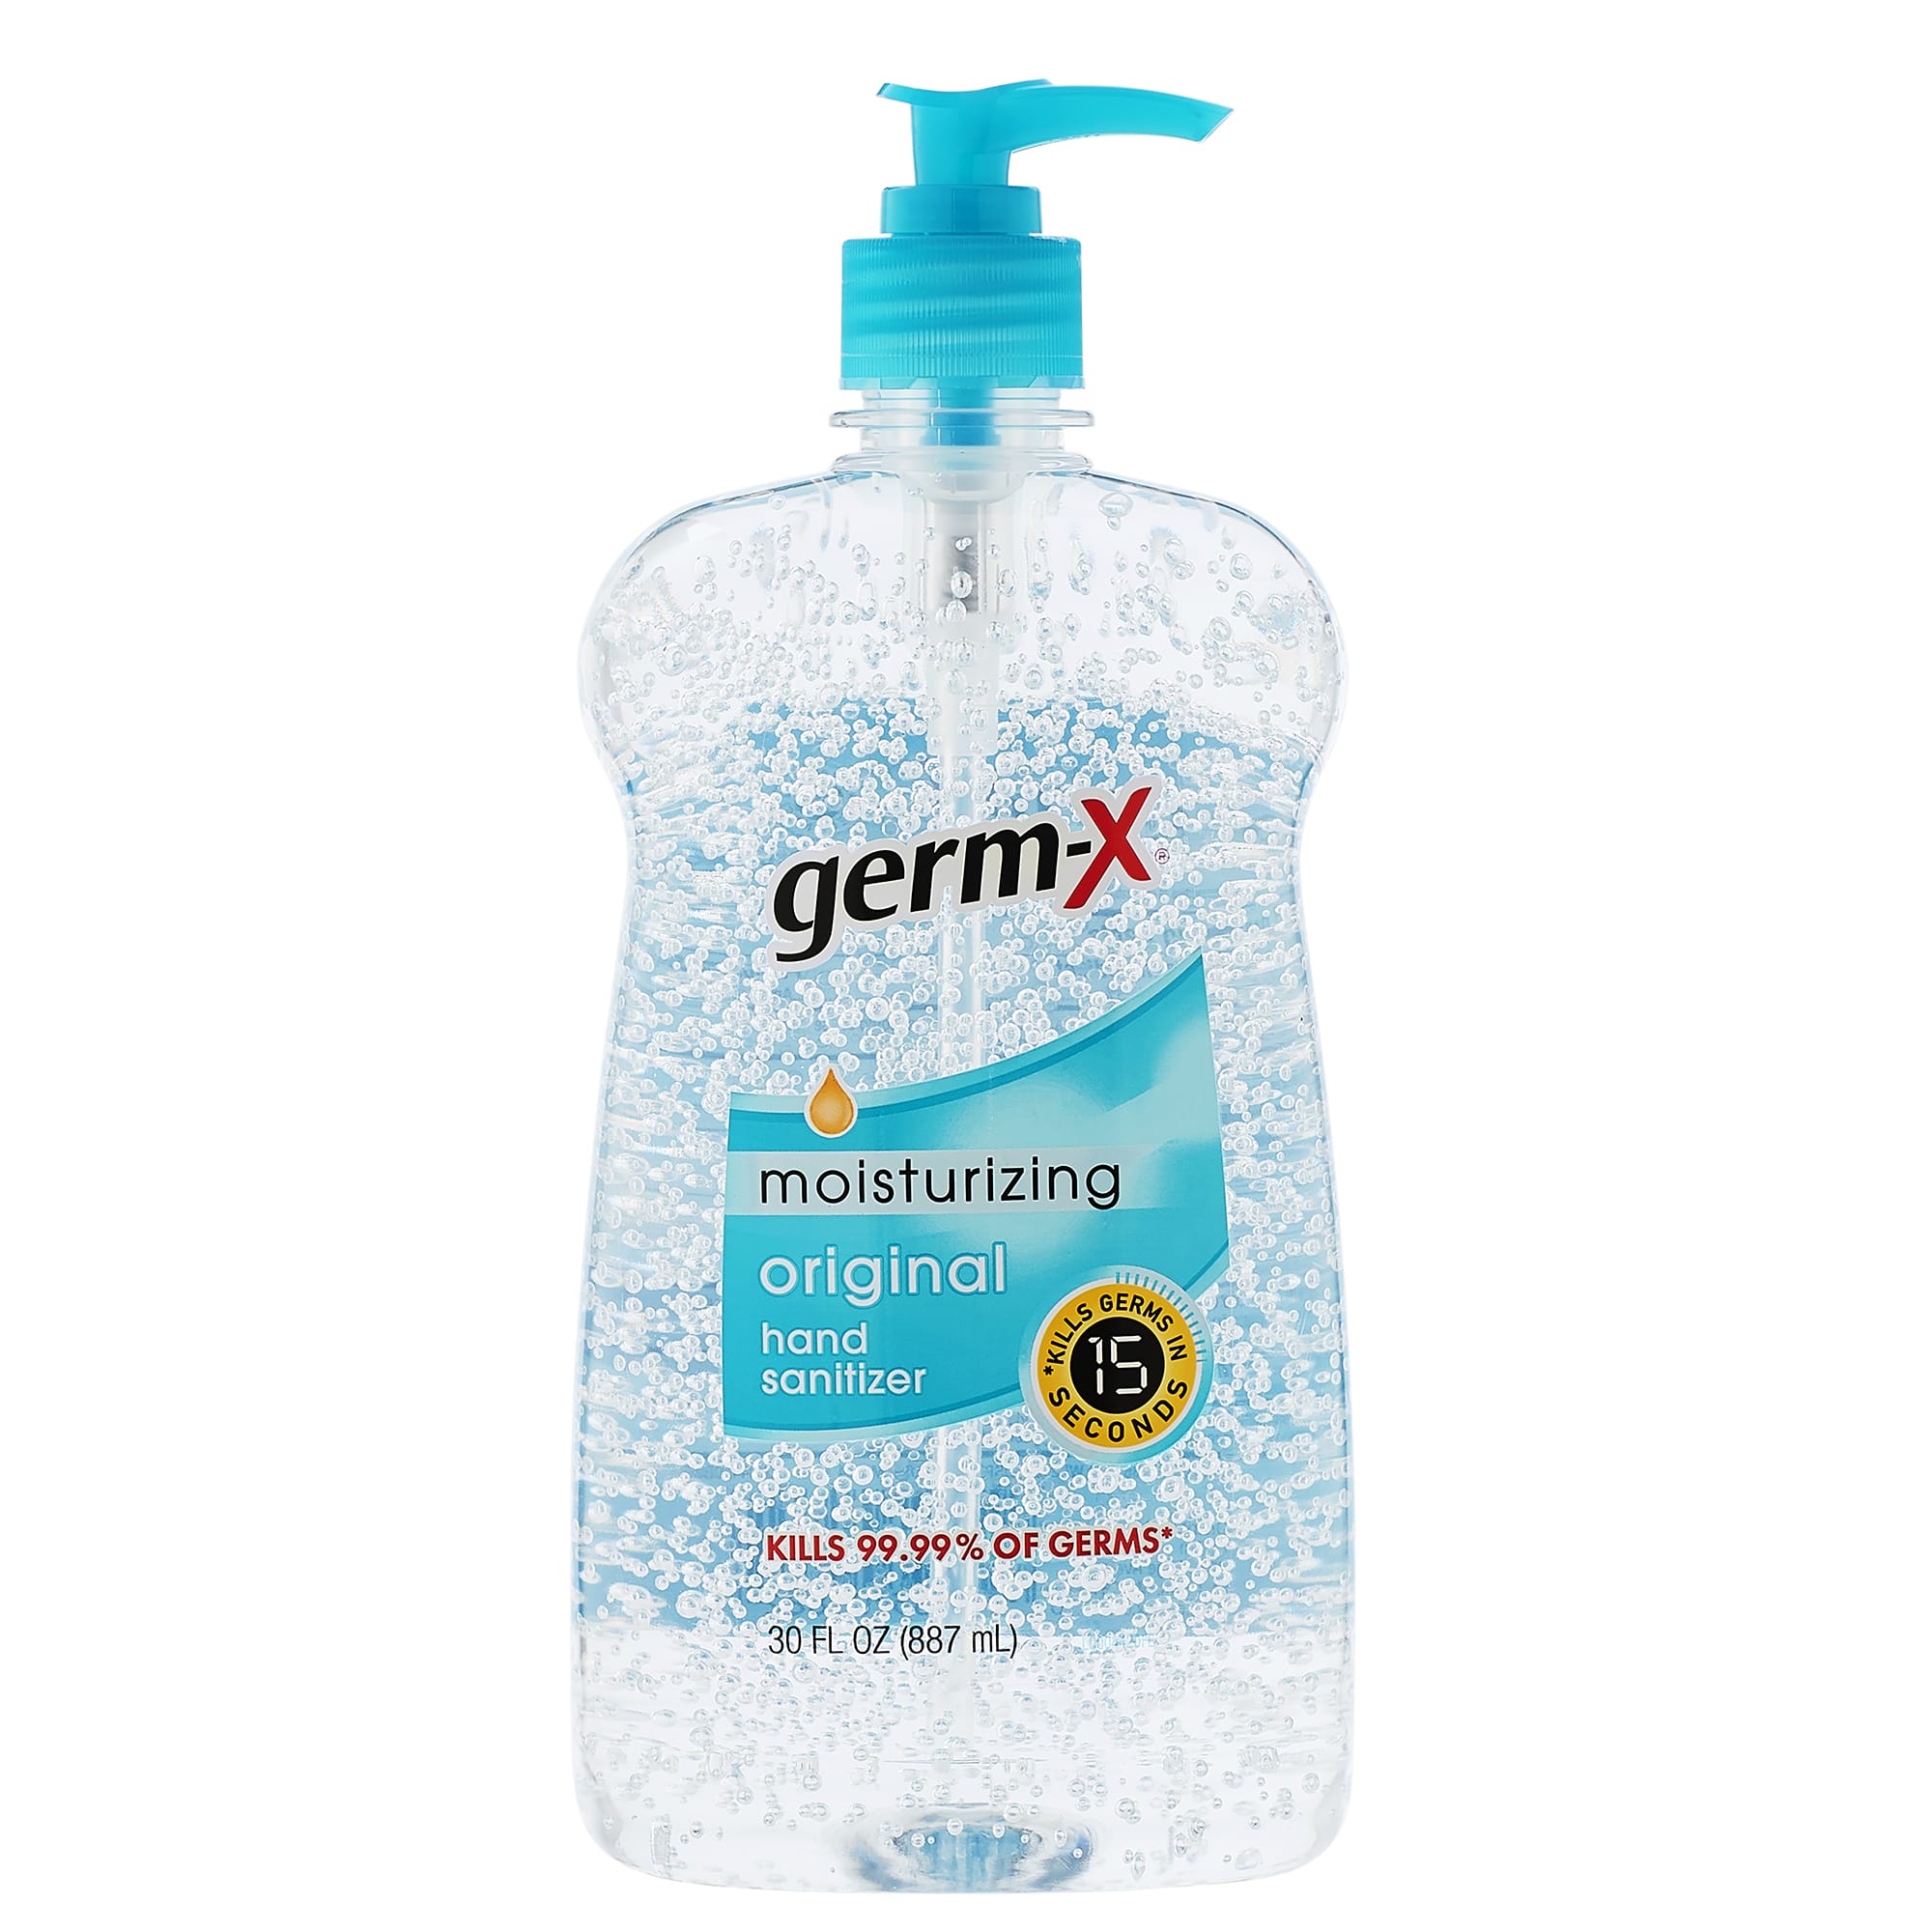 15 Best Hand Sanitizer Brands In 2020 According To Health Experts